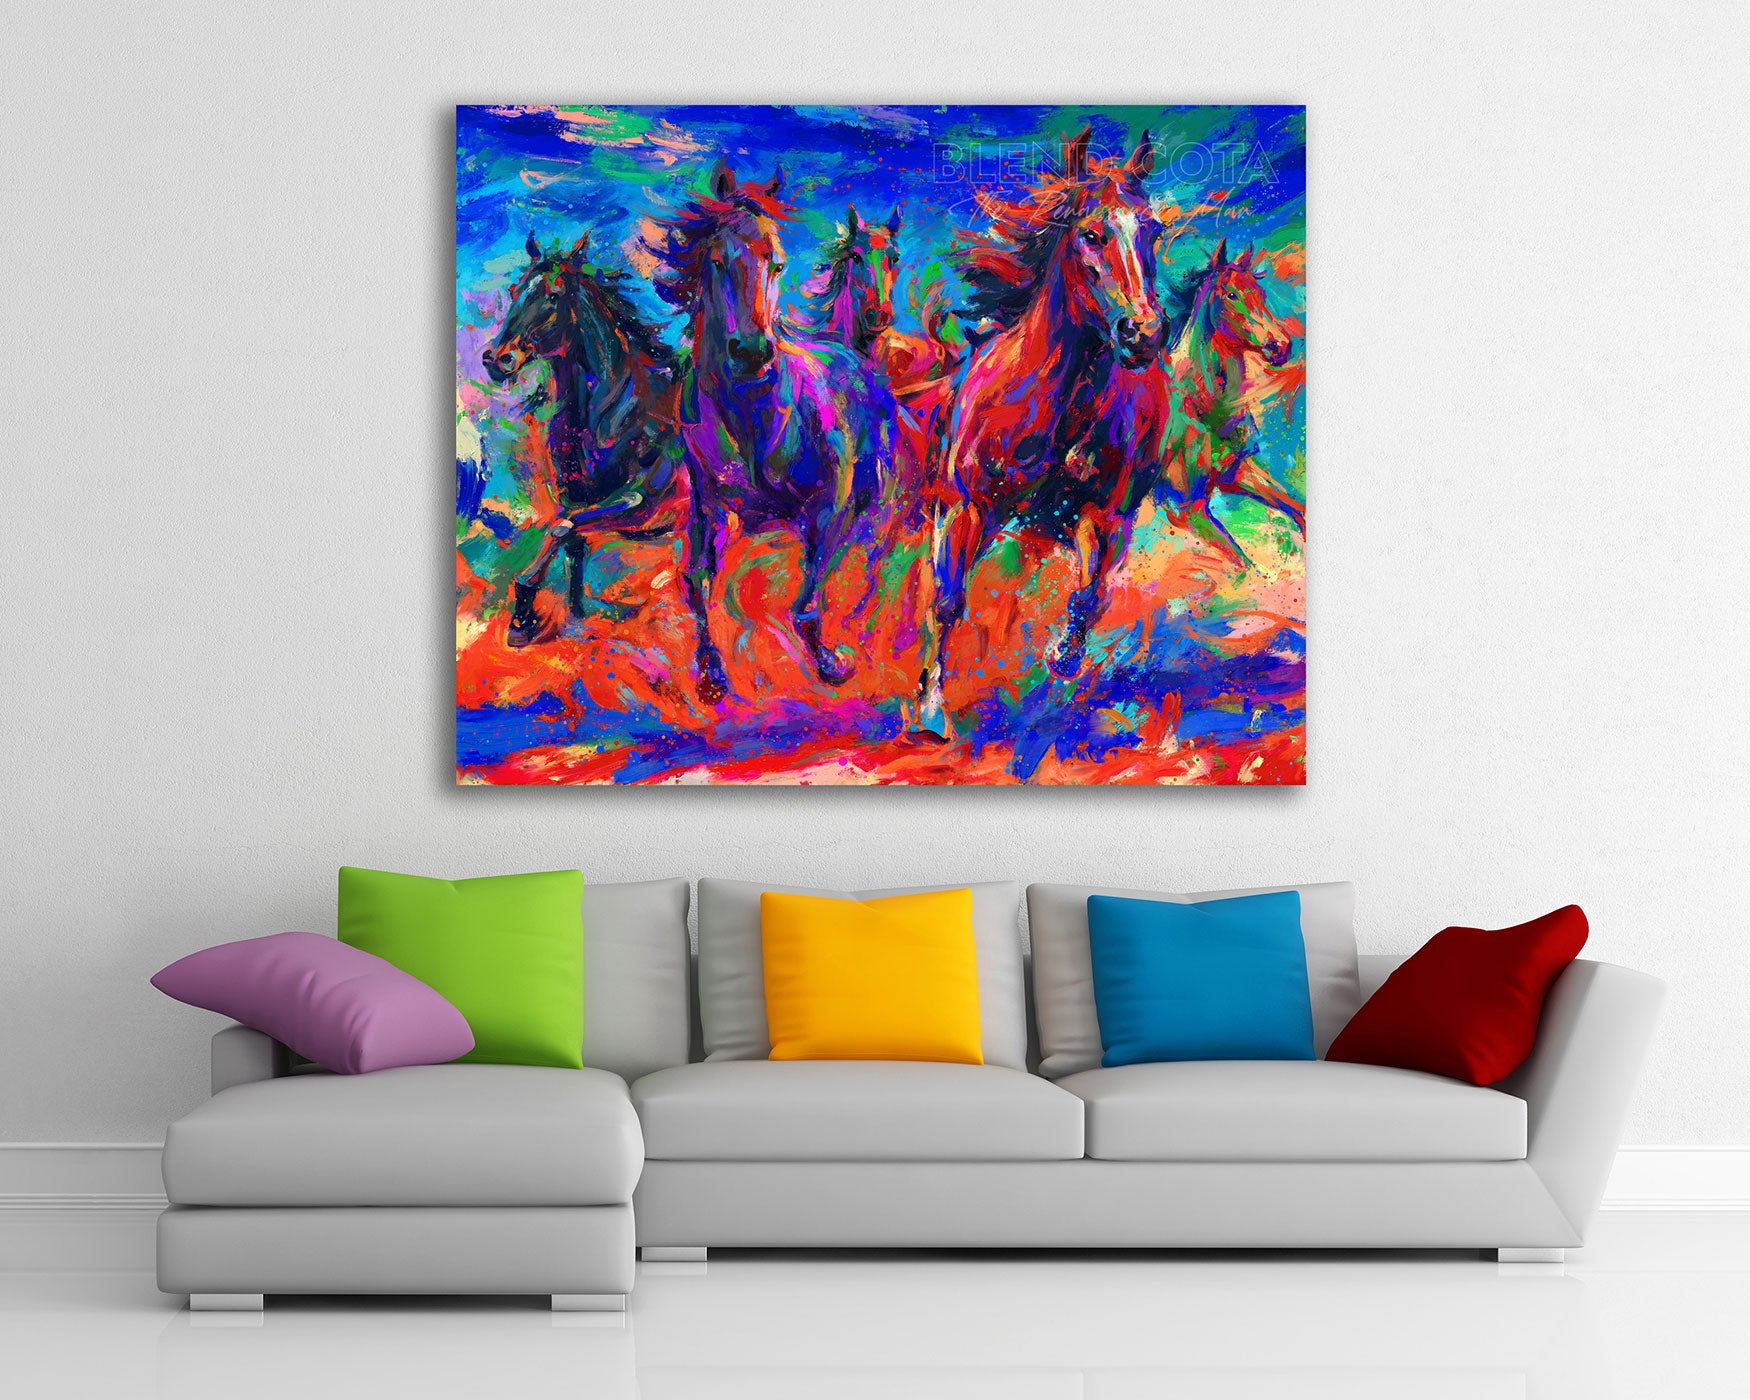 Gallop of the Wild - Blend Cota Limited Edition Art on Canvas- Blend Cota Studios 